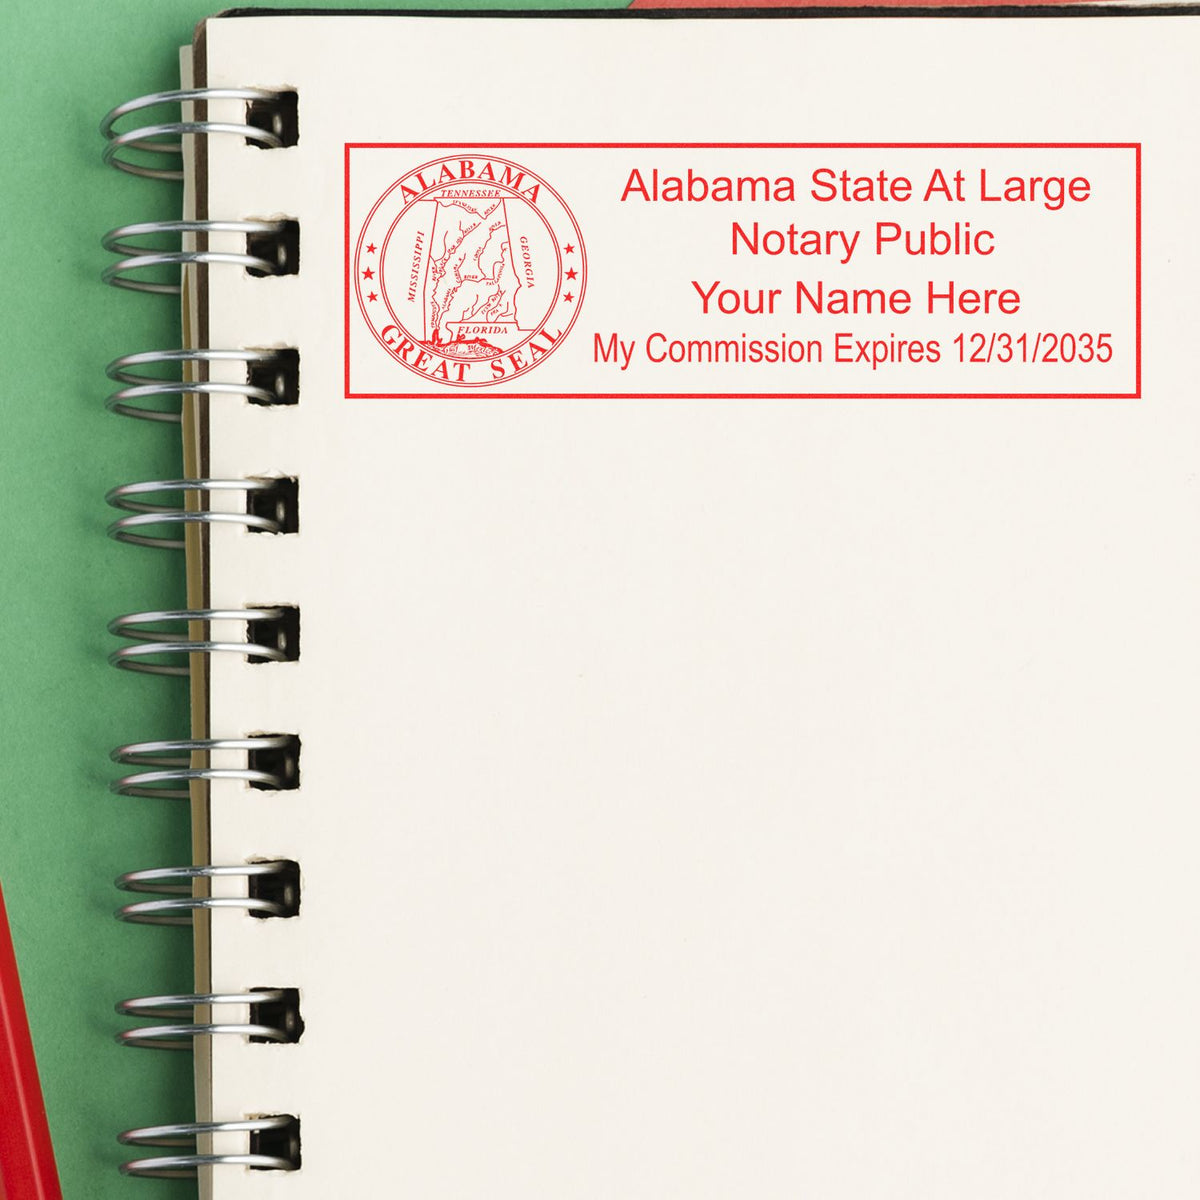 The Self-Inking State Seal Alabama Notary Stamp stamp impression comes to life with a crisp, detailed photo on paper - showcasing true professional quality.